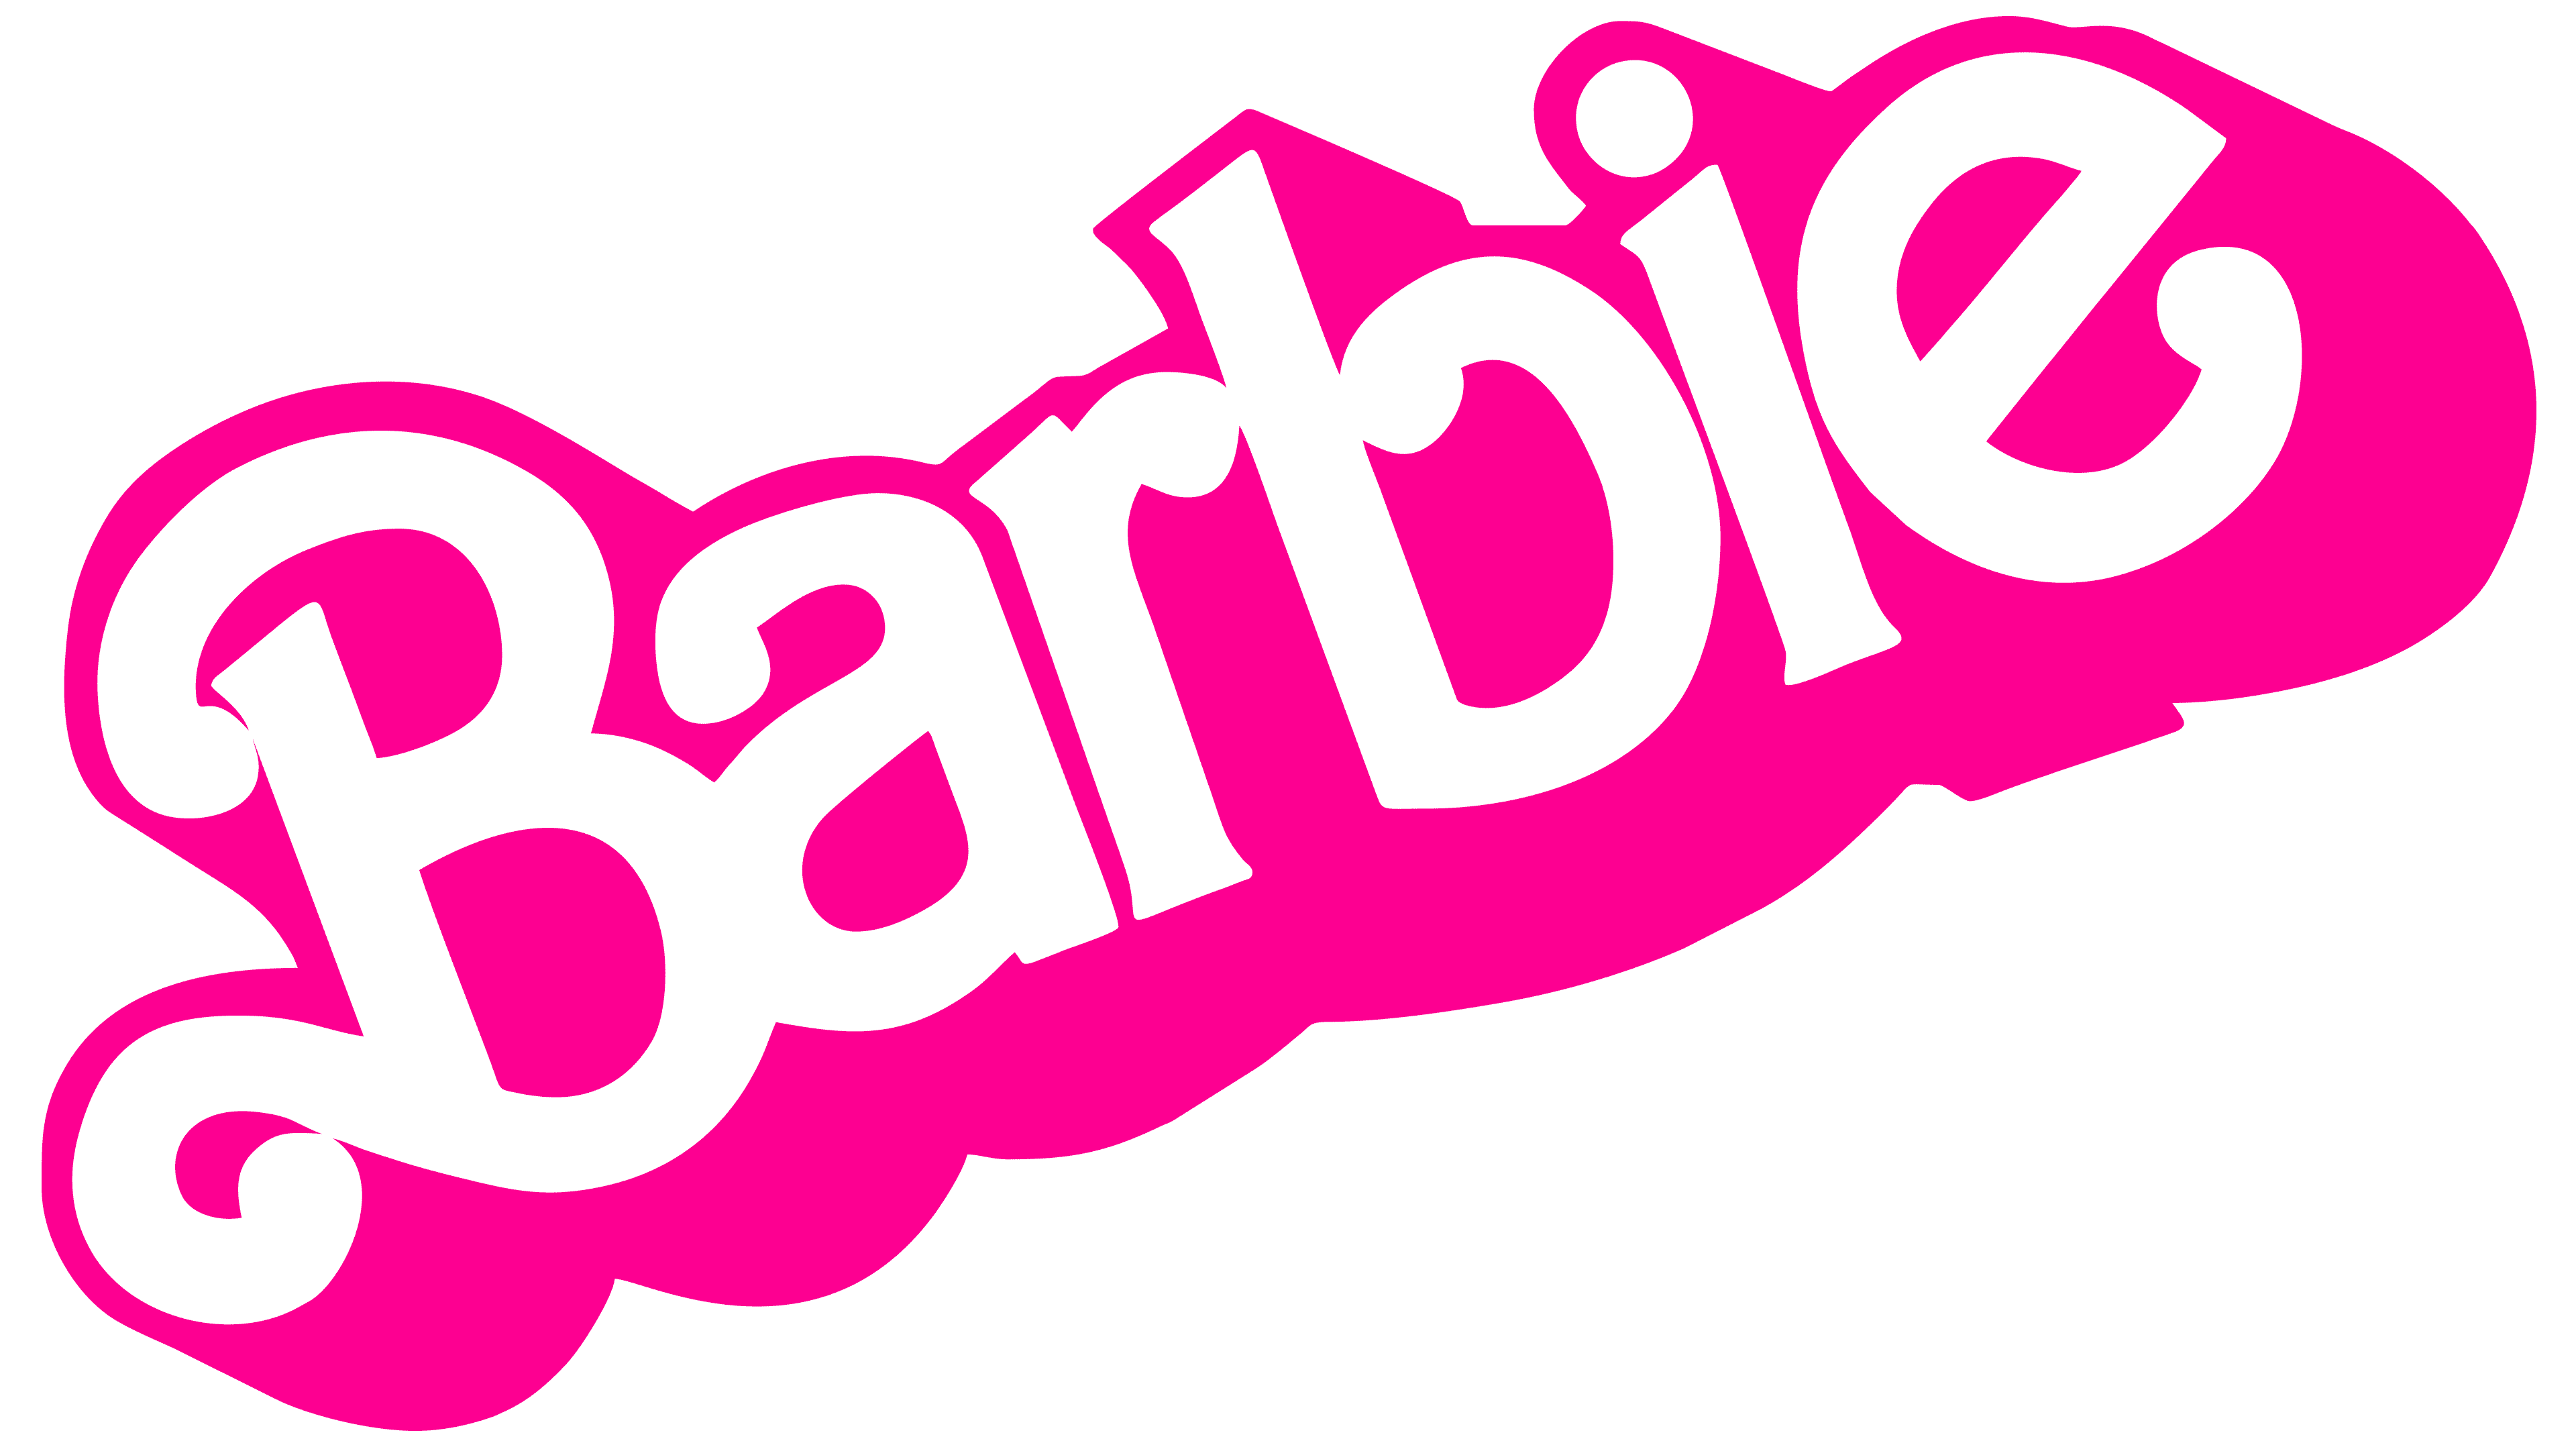 Barbie Logo, symbol, meaning, history, PNG, brand